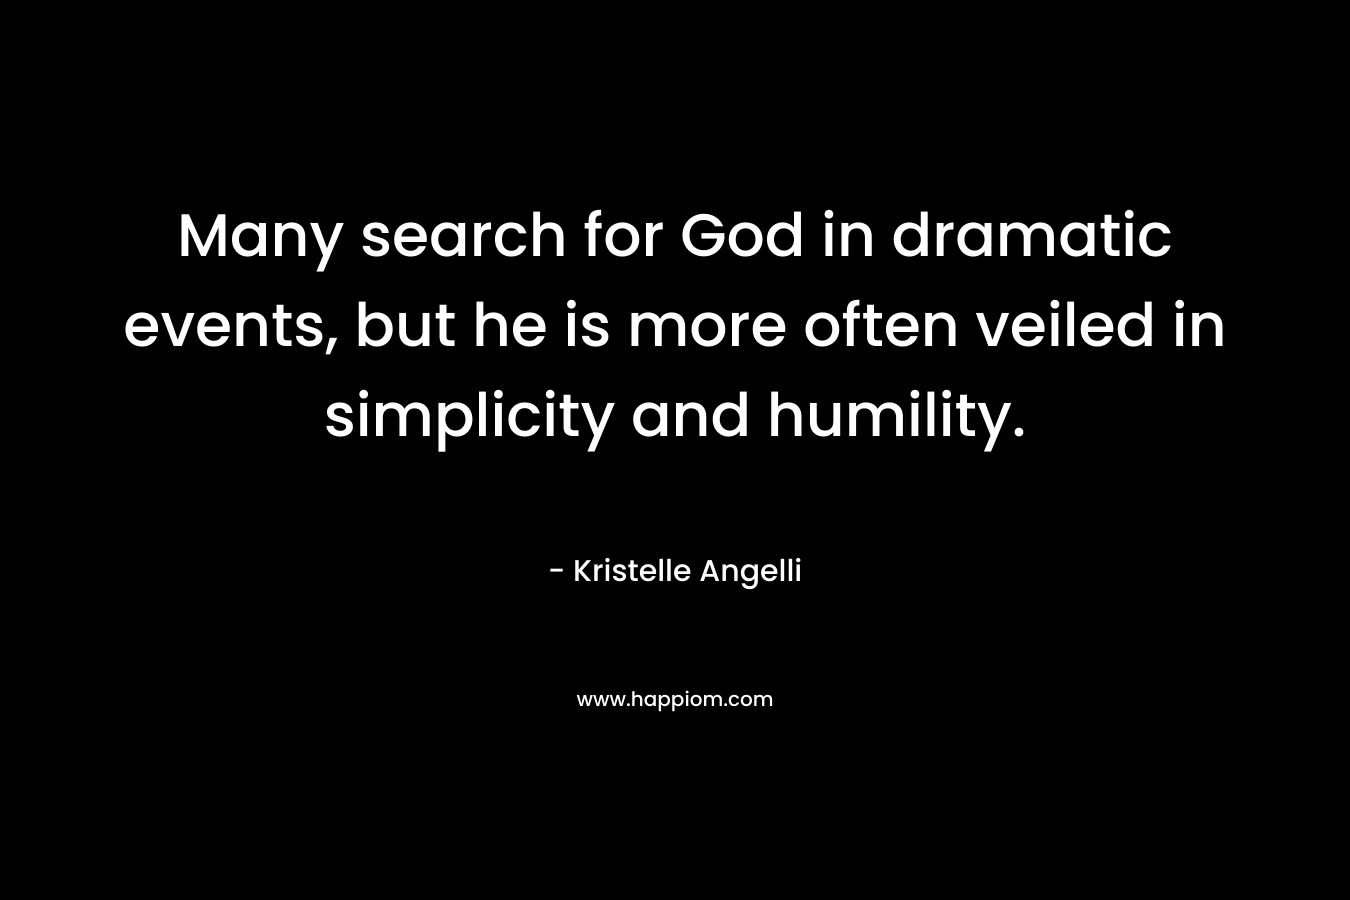 Many search for God in dramatic events, but he is more often veiled in simplicity and humility.